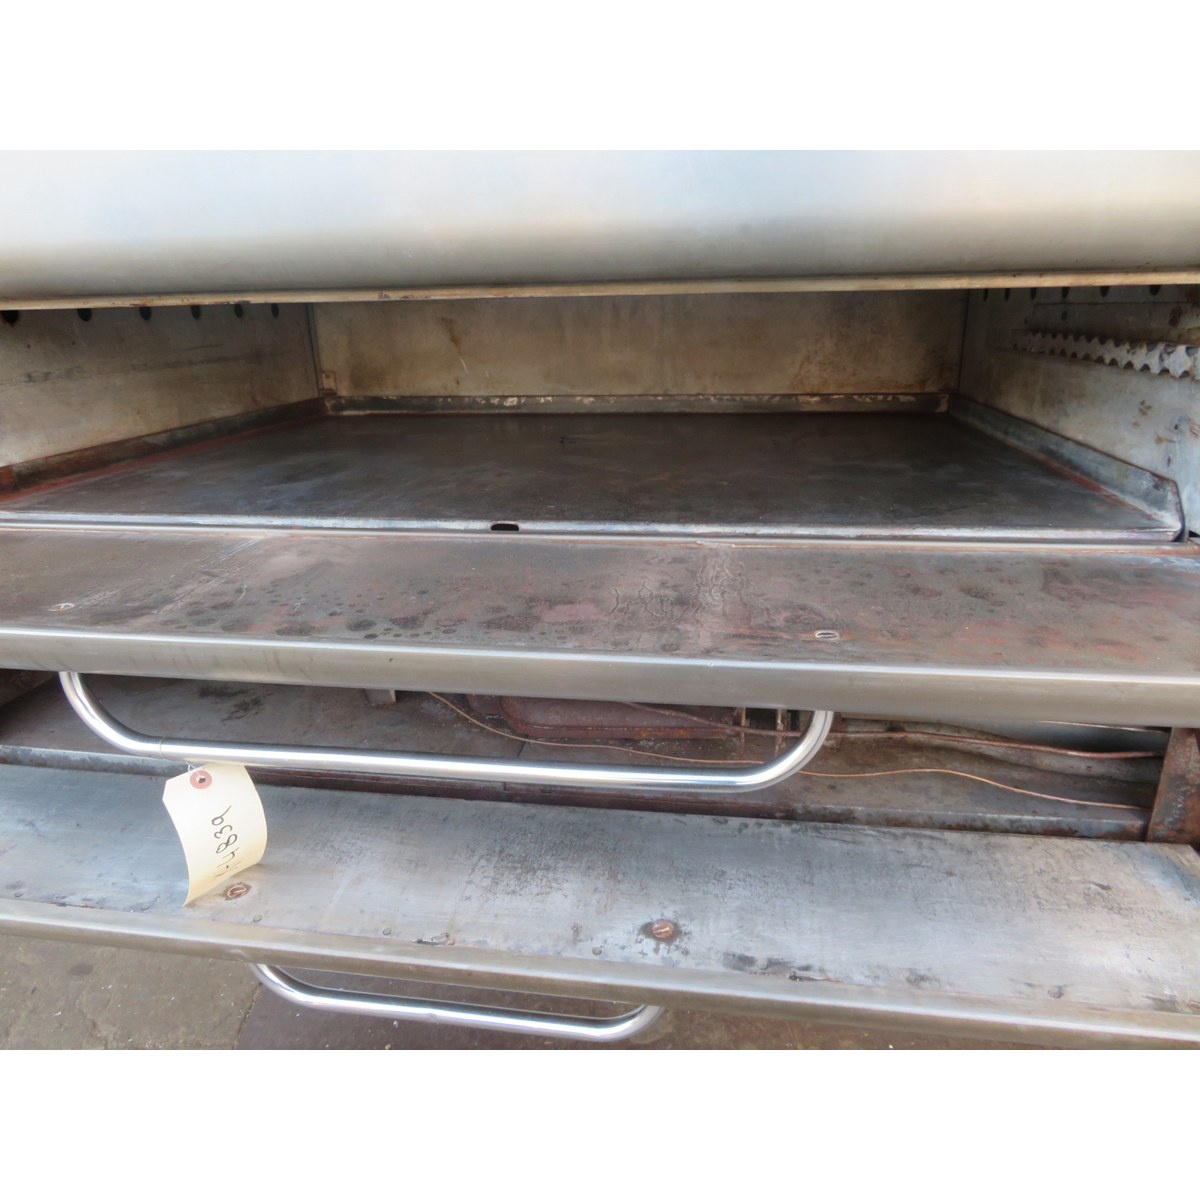 Blodgett 981 Deck Oven, Used Good Condition image 2